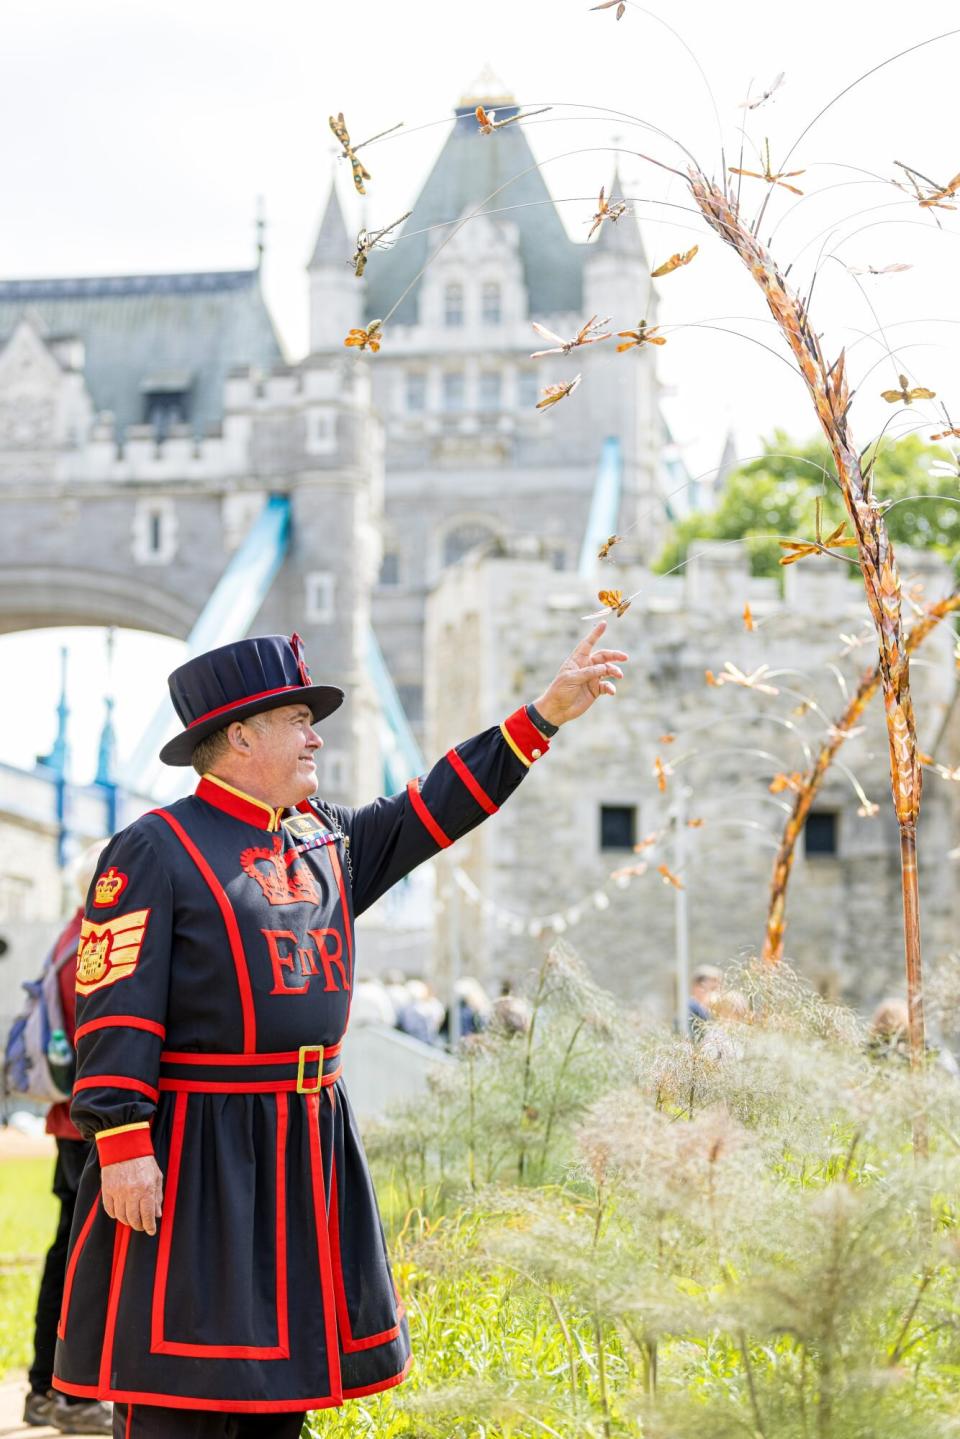 Tower of London Unveils Floral Garden to Celebrate Queen Elizabeth's Platinum Jubilee — in Its Moat! . SUPERBLOOM IMAGES AVAILABLE FOR FREE EDITORIAL USE. NO LIBRARY RIGHTS. CREDIT: © HISTORIC ROYAL PALACES.